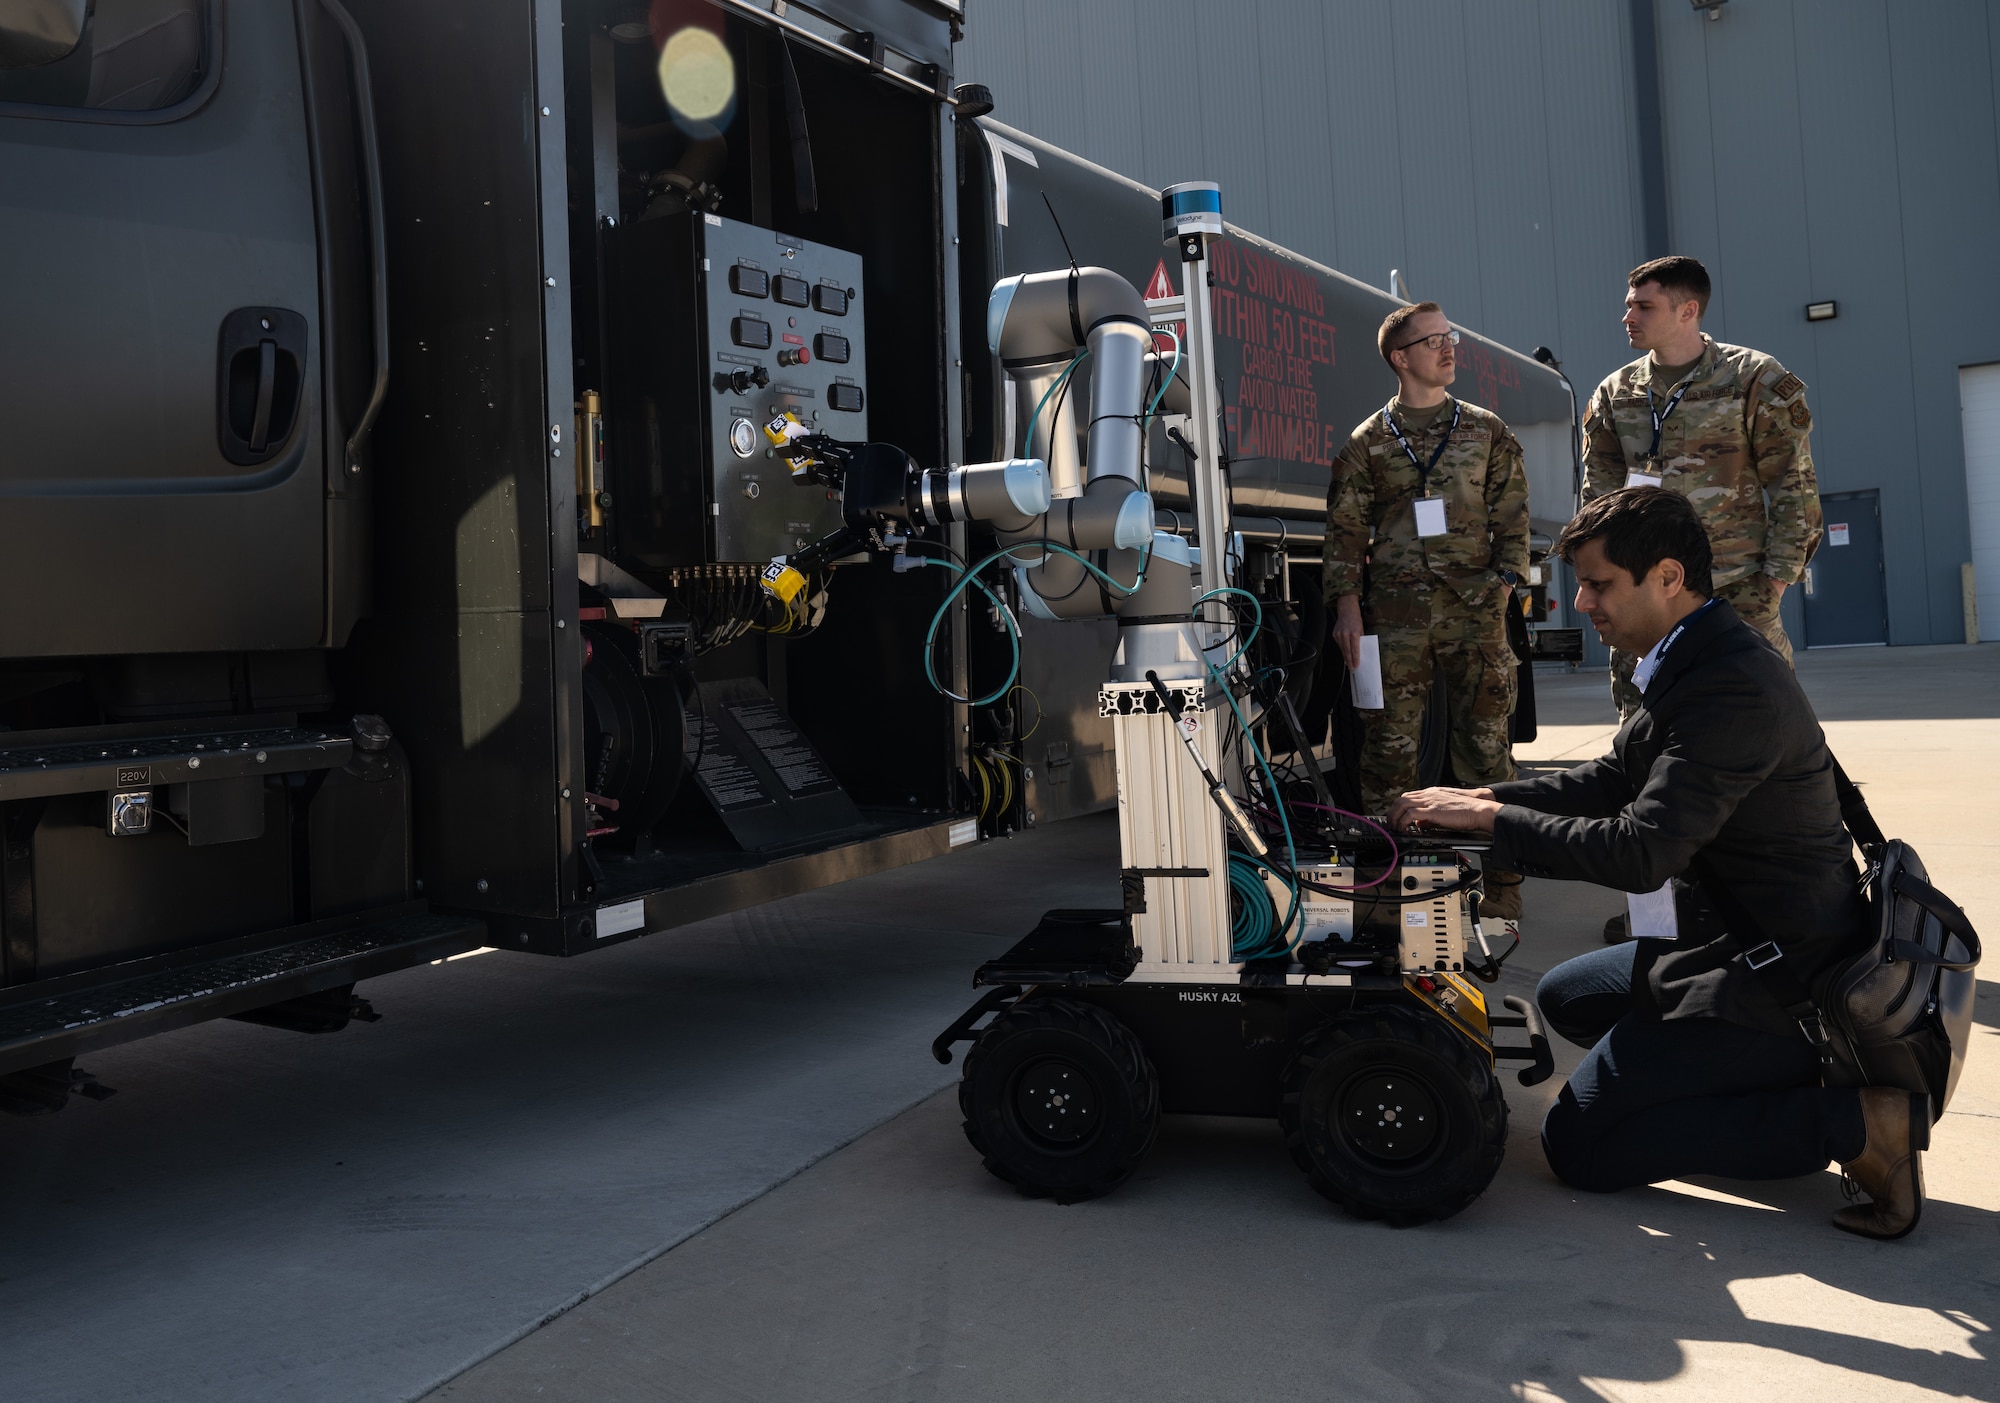 Shashwat Srivastav, Aivot chief executive officer, updates the software for his company’s robot to work on a fuel truck during STRATO-Tech, a convention for the sustainment of the KC-135 Stratotanker, April 22, 2024, in Wichita, Kansas. STRATO-Tech is an initiative under the Sustainment Technologies, Research and Automation for Transformative Operations Testbed that studies, develops and tests innovations to improve the efficiency and cost-effectiveness of the KC-135. (U.S. Air Force photo by Staff Sgt. Tryphena Mayhugh)